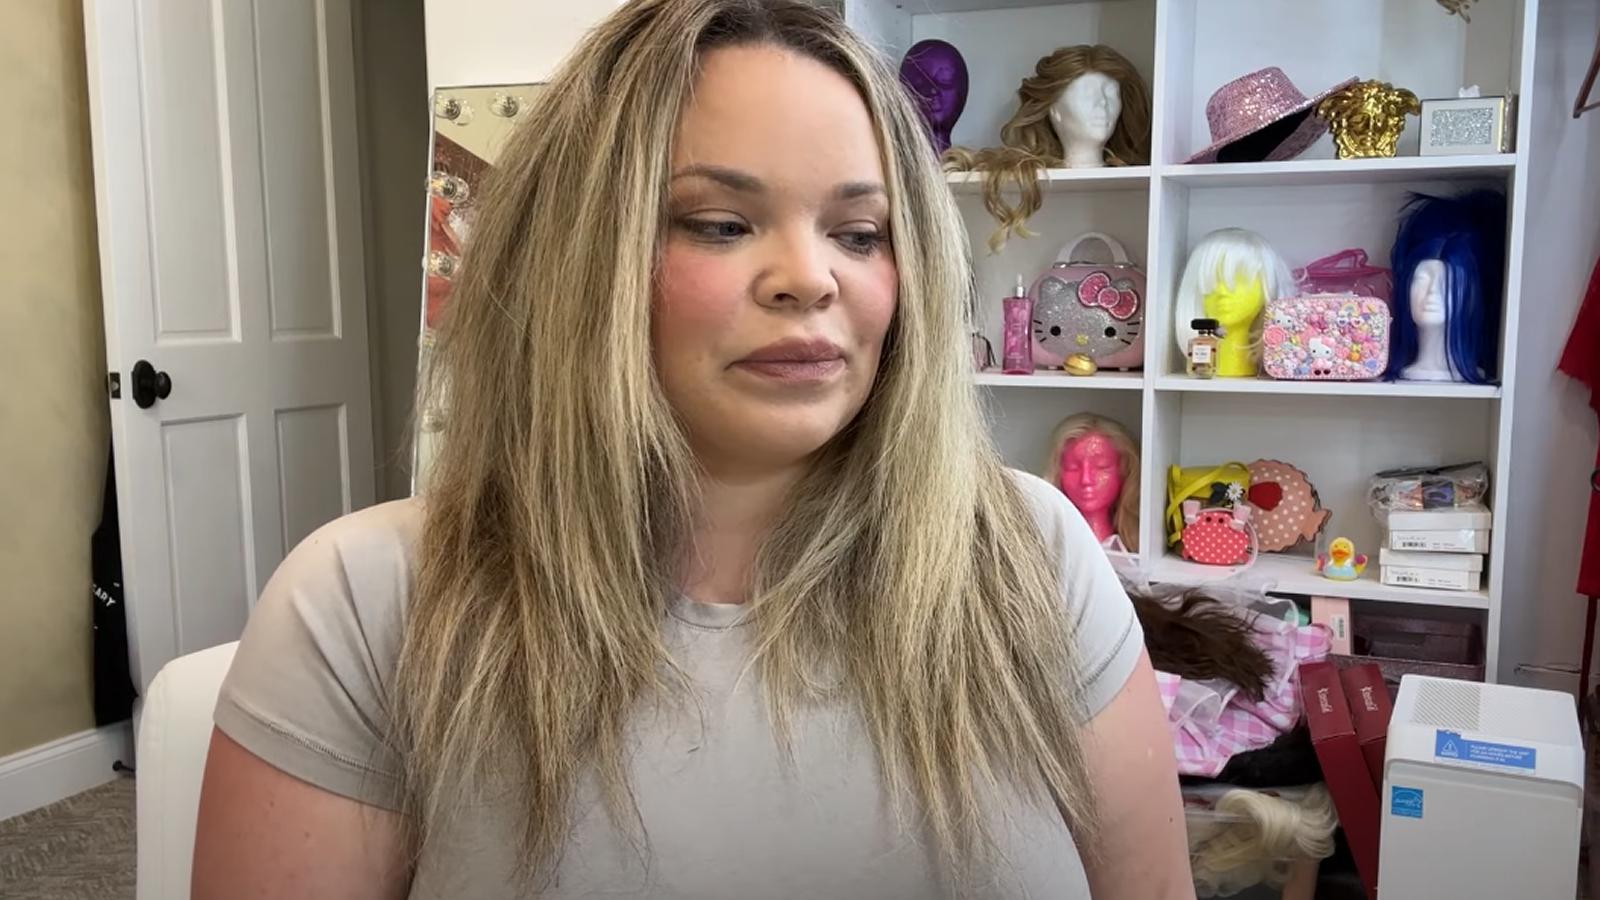 Trisha Paytas responds to Colleen Ballinger sharing and mocking private photos